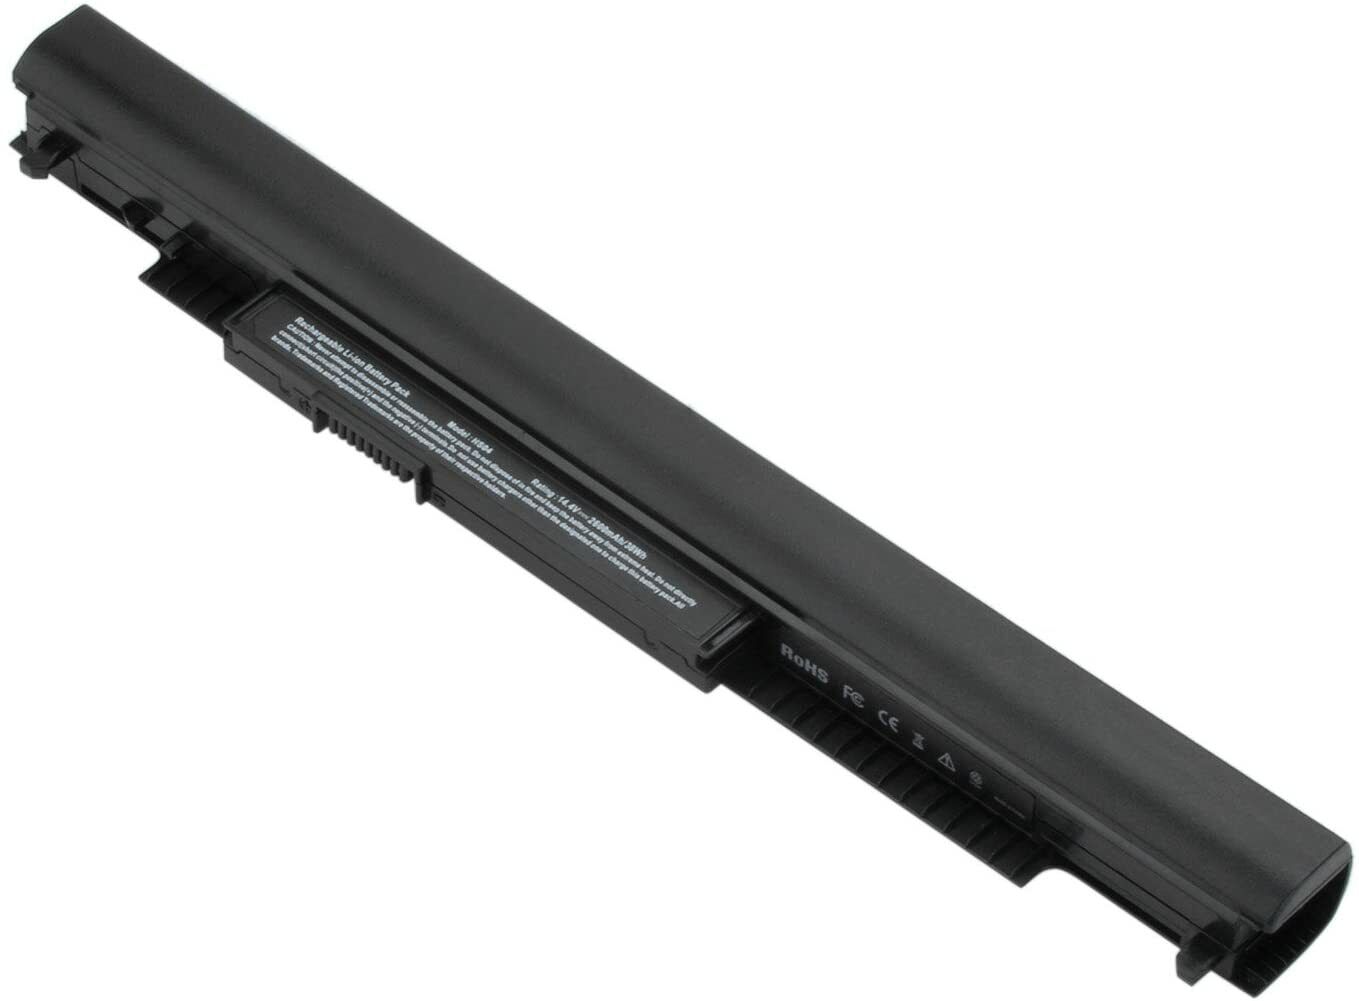 HS03 HS04 Notebook Battery For HP 807956-001 807957-001 807612-421 807611-421